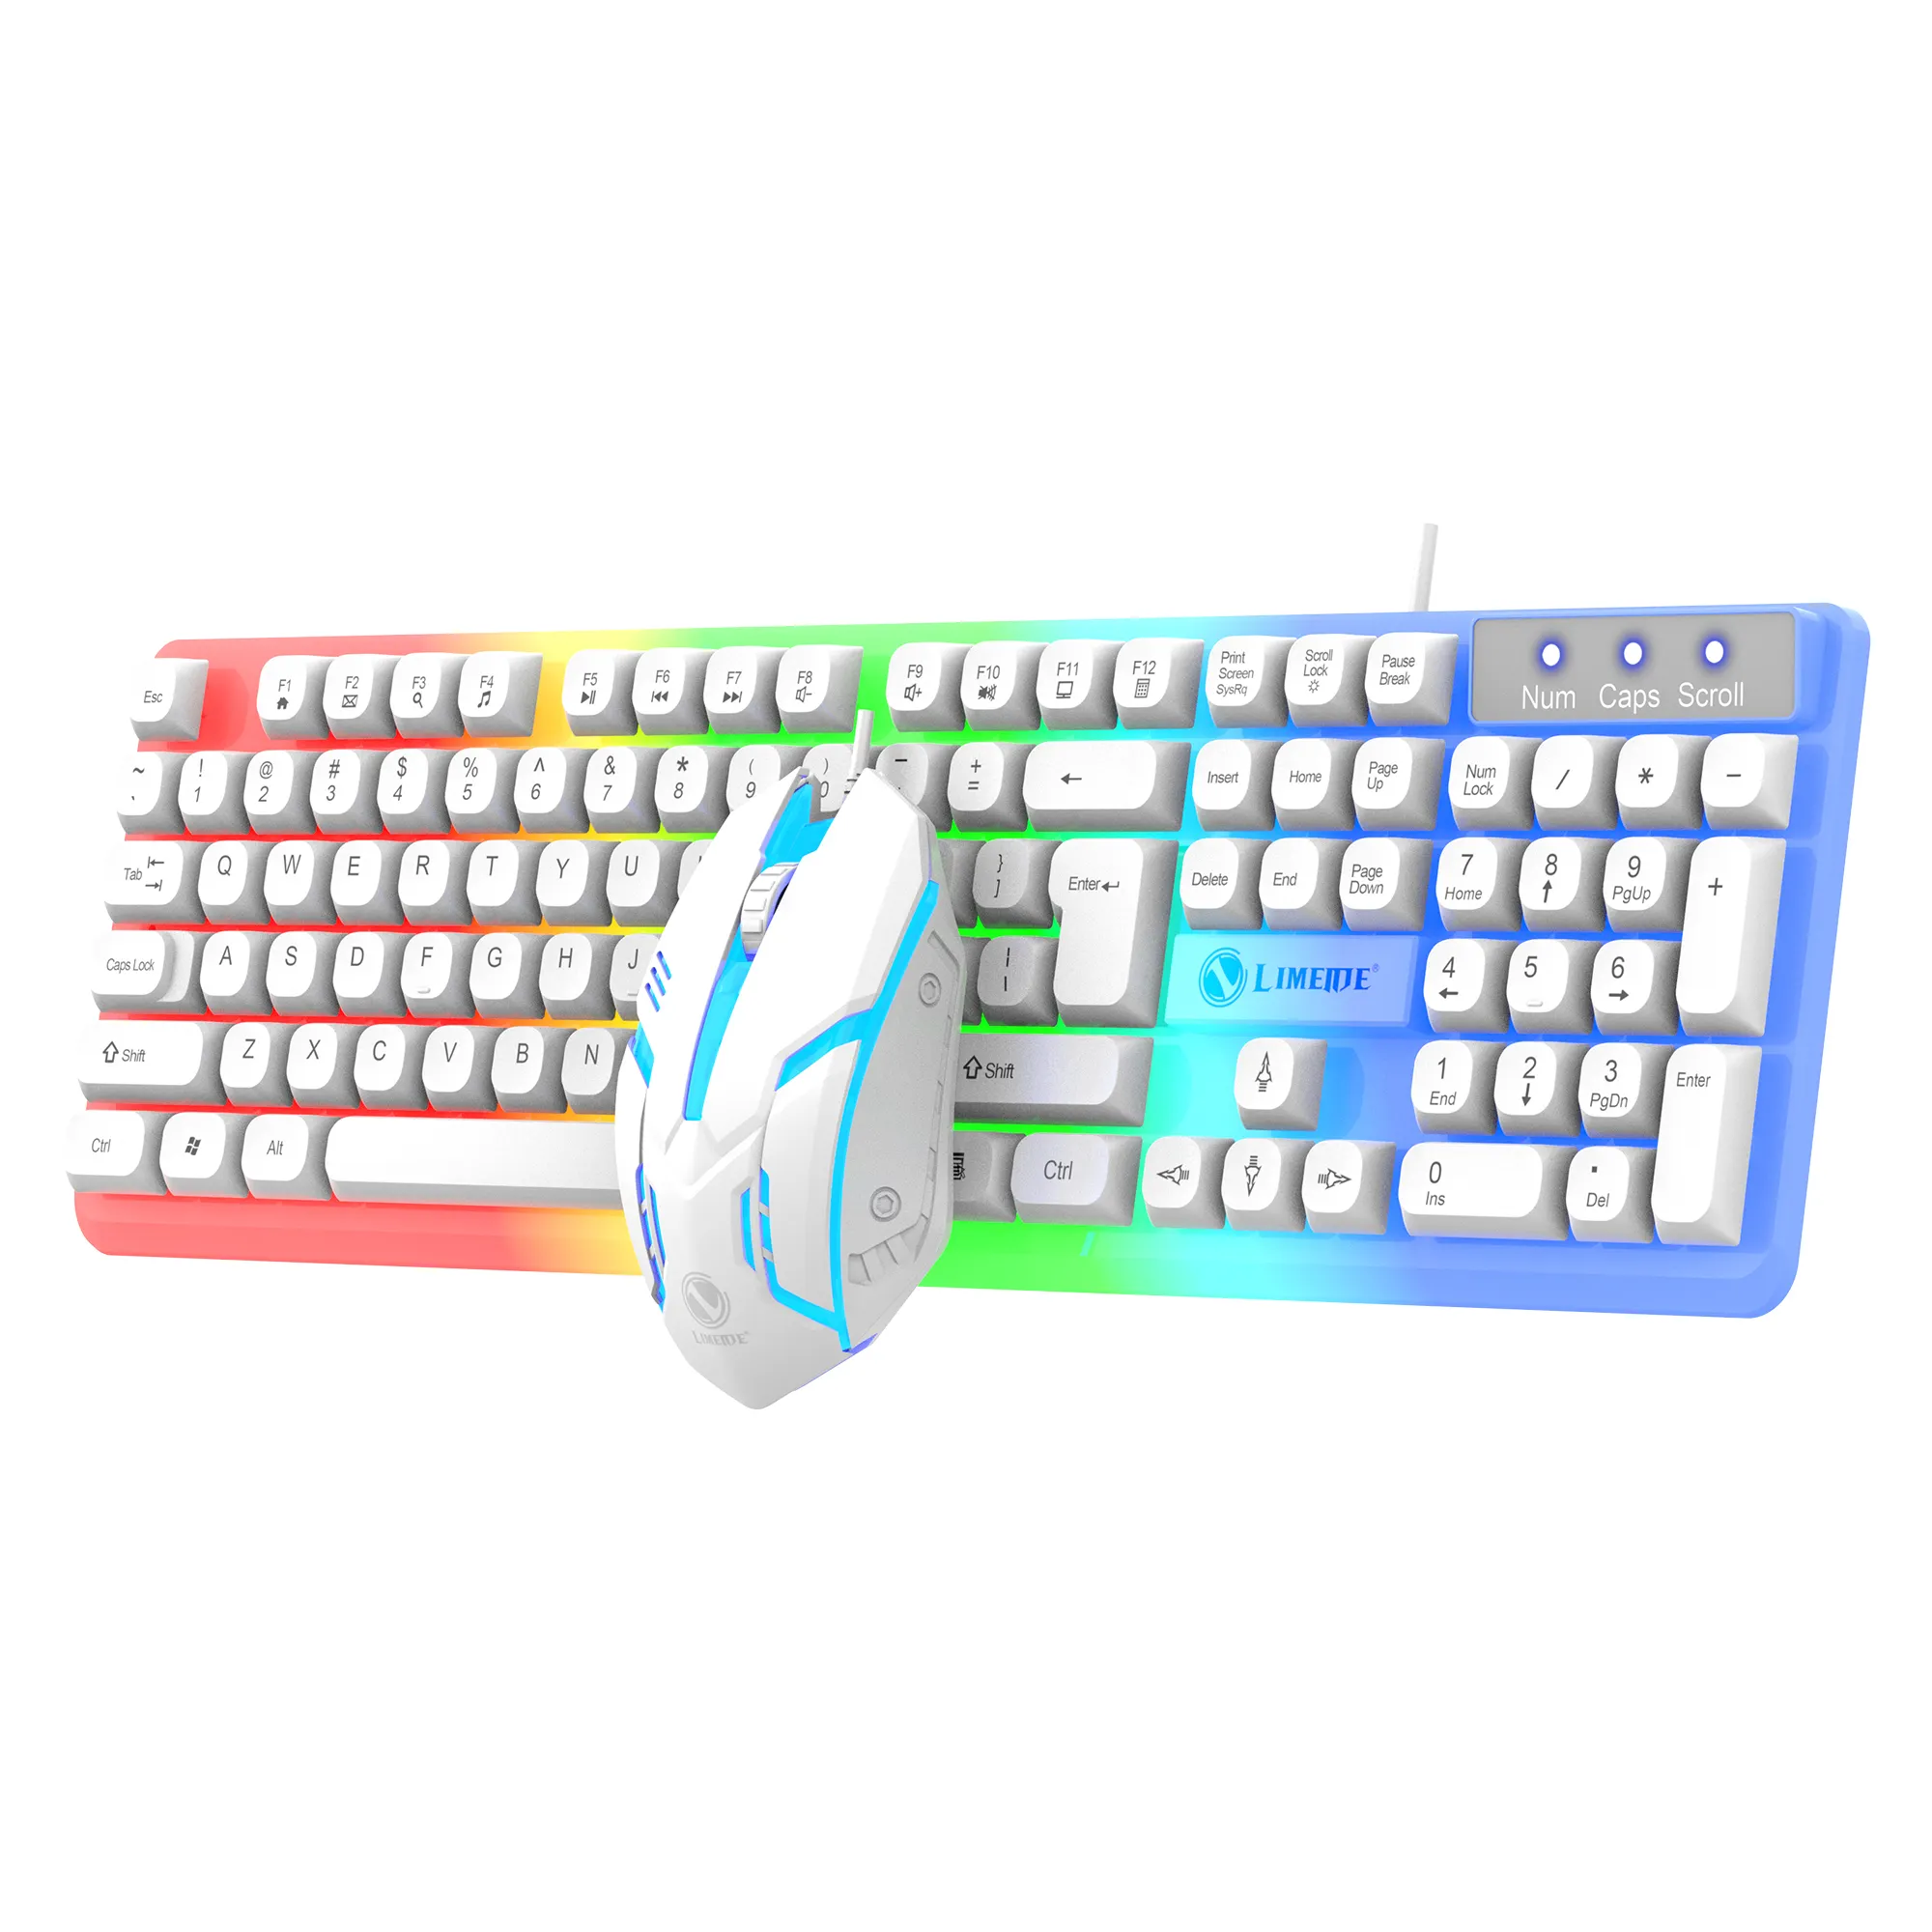 Lantronlife GTX-350 Factory Wholesale Cheap Keyboard and Mouse Gaming Keyboard Mouse combos - White